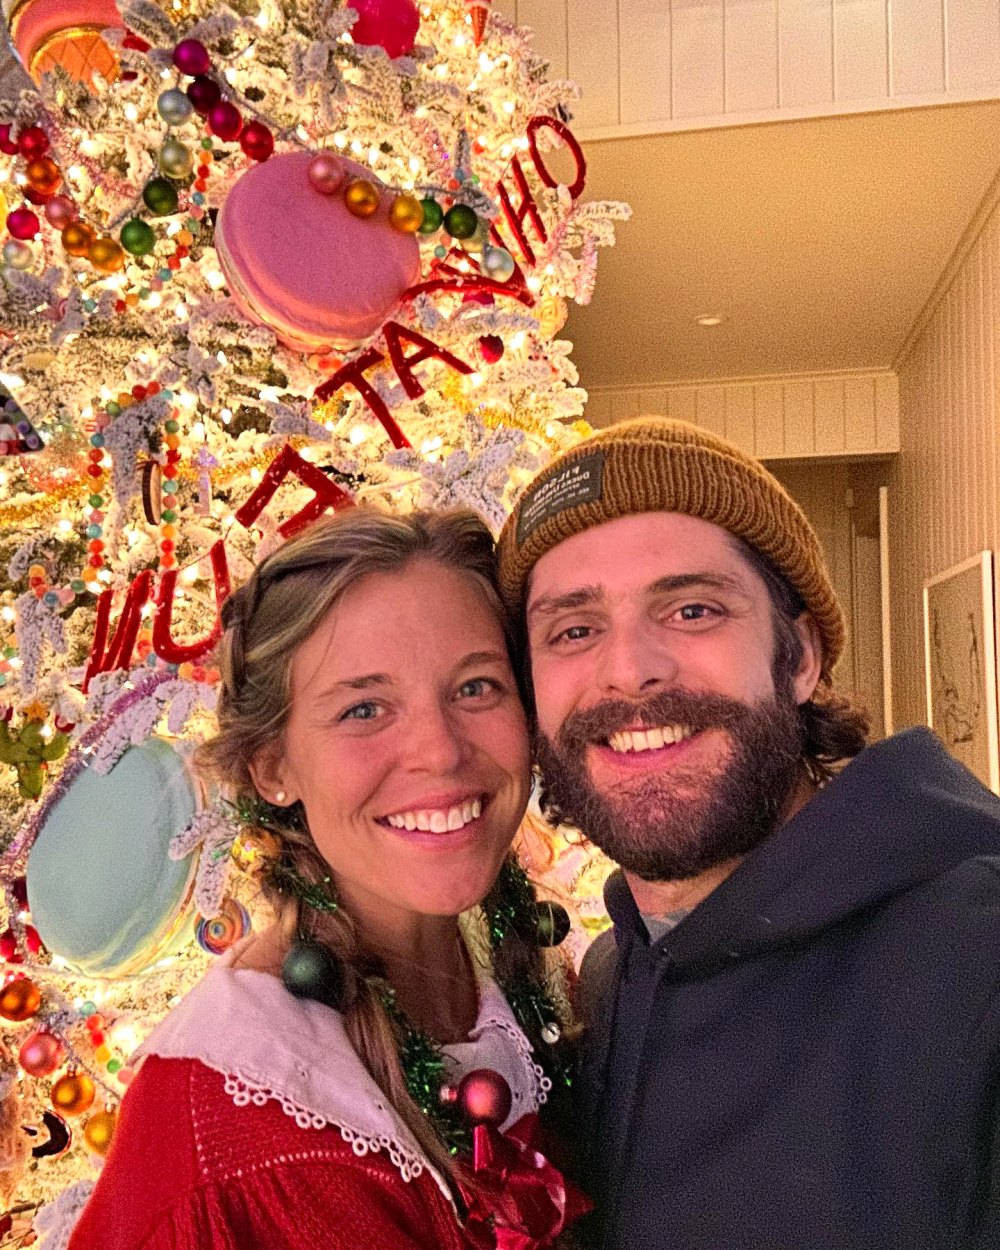 Thomas Rhett Can't Stop Laughing Over Wife Lauren Climbing Ladder to Decorate Tall Christmas Tree 